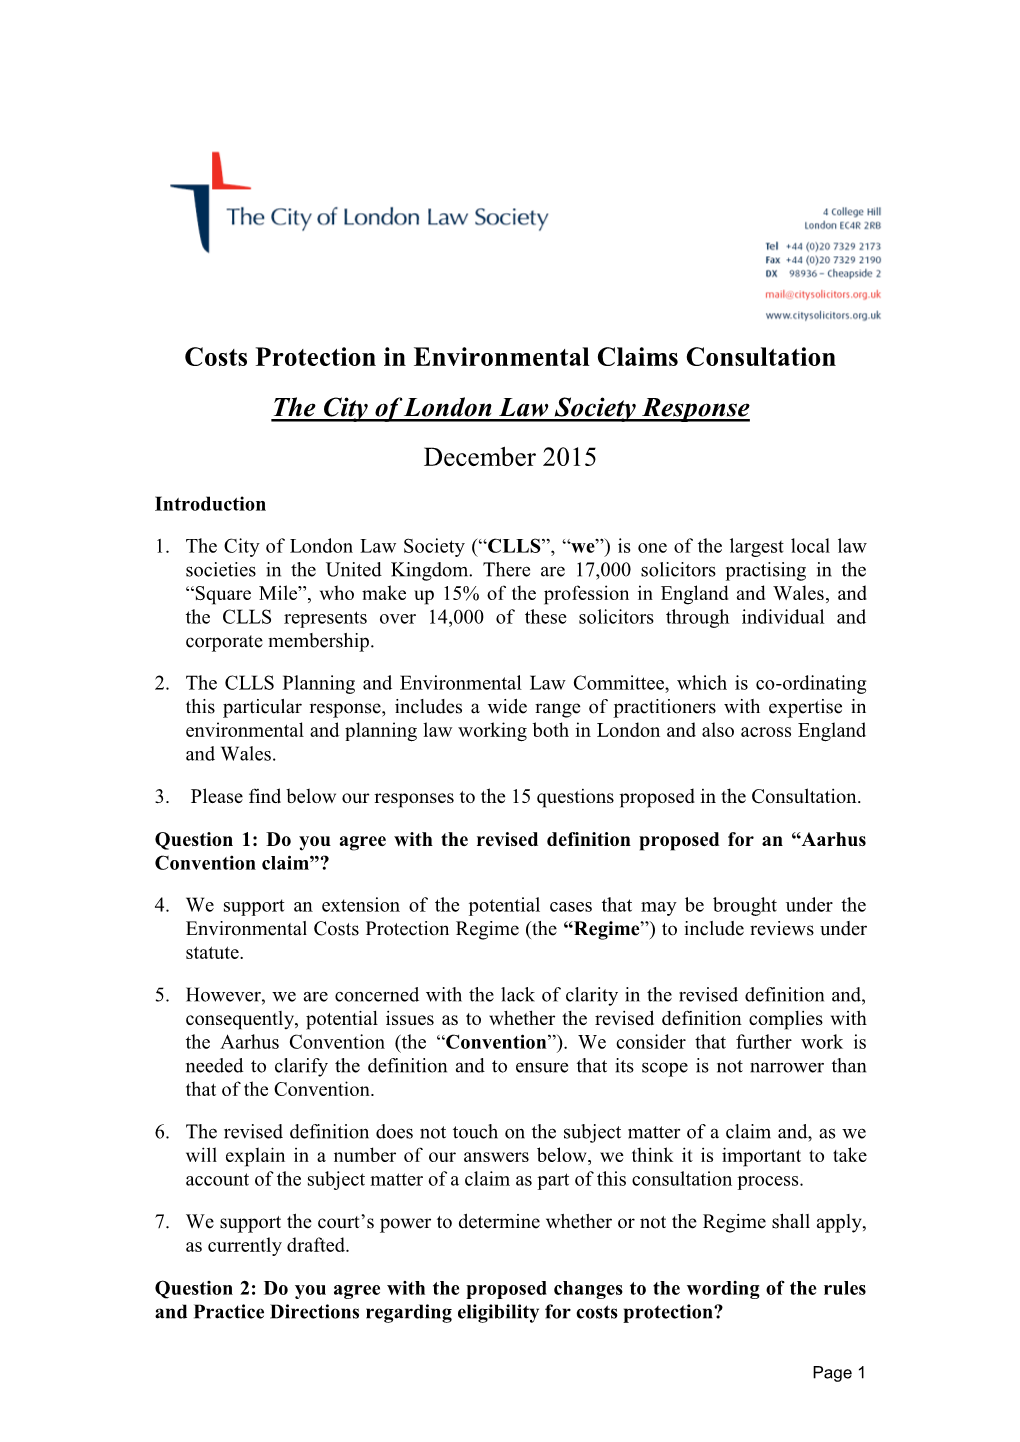 Costs Protection in Environmental Claims Consultation the City of London Law Society Response December 2015